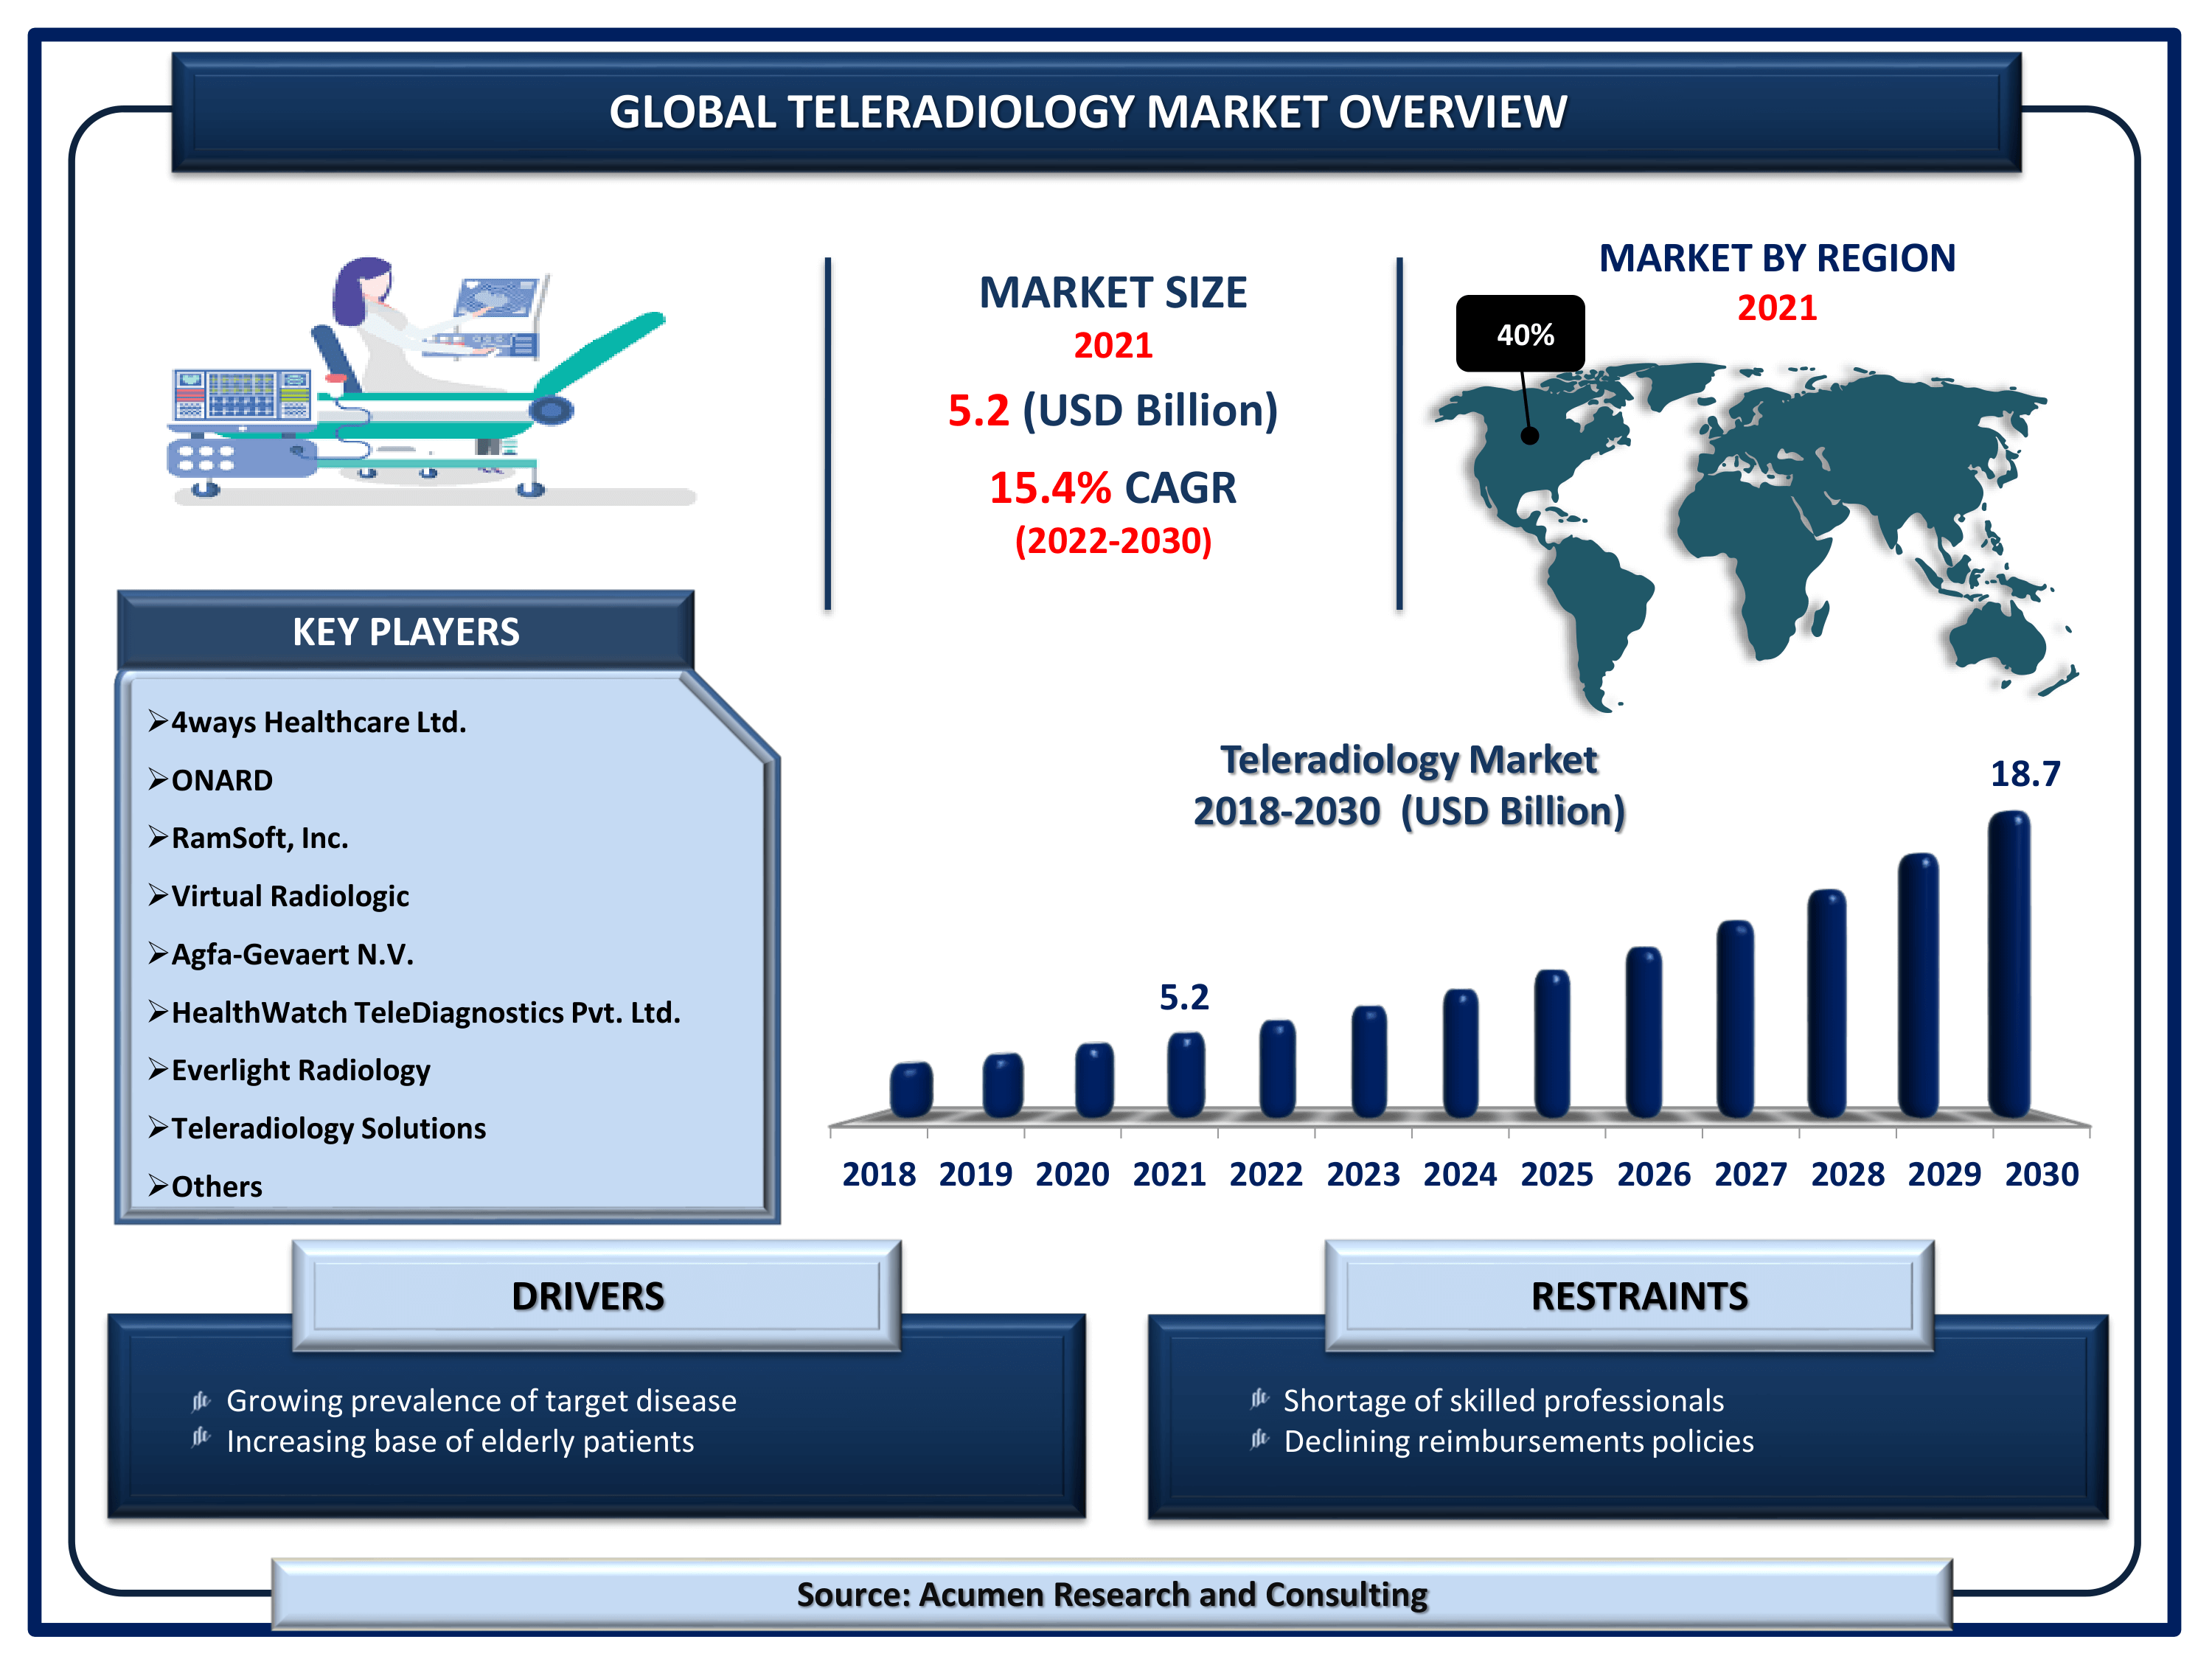 Global teleradiology market revenue is estimated to reach USD 18.7 Billion by 2030 with a CAGR of 15.4% from 2022 to 2030